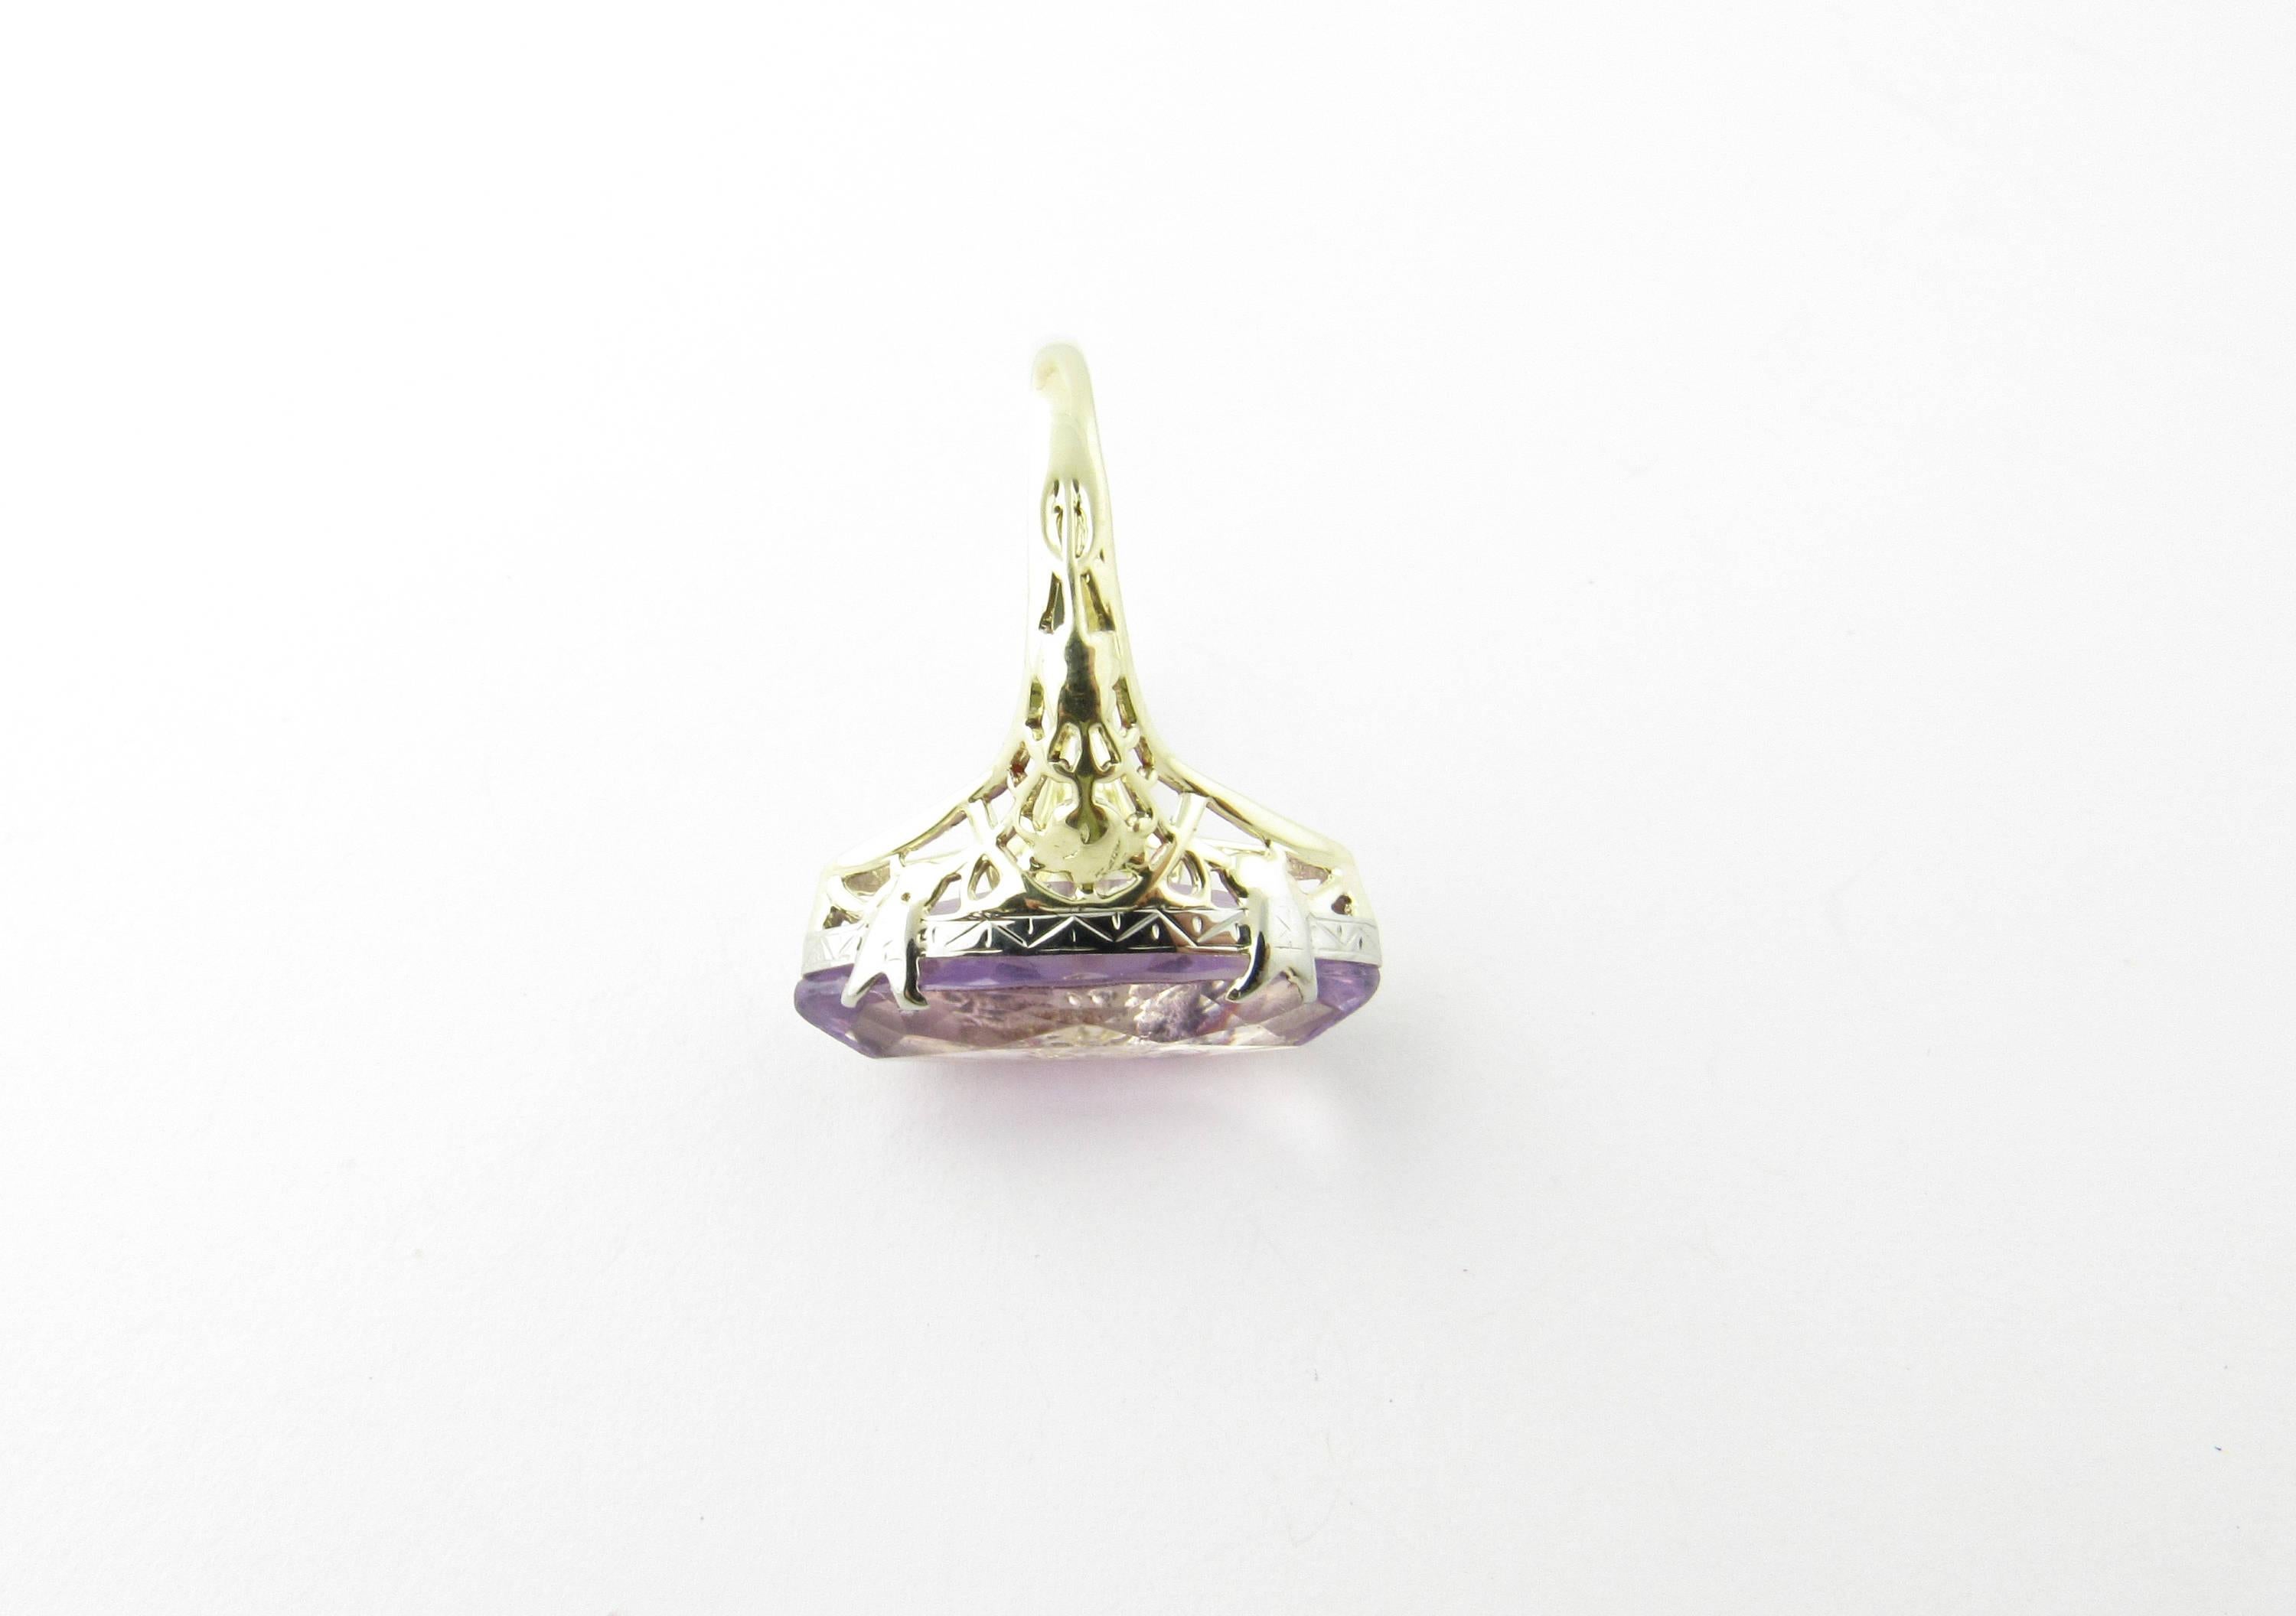 Vintage 14 Karat Yellow Gold Amethyst Ring Size 6.75- 
This lovely ring features a genuine marquis amethyst (20 mm x 10 mm) set in beautifully detailed yellow gold filigree. Some surface scratches on stone not visible to naked eye. Shank measures